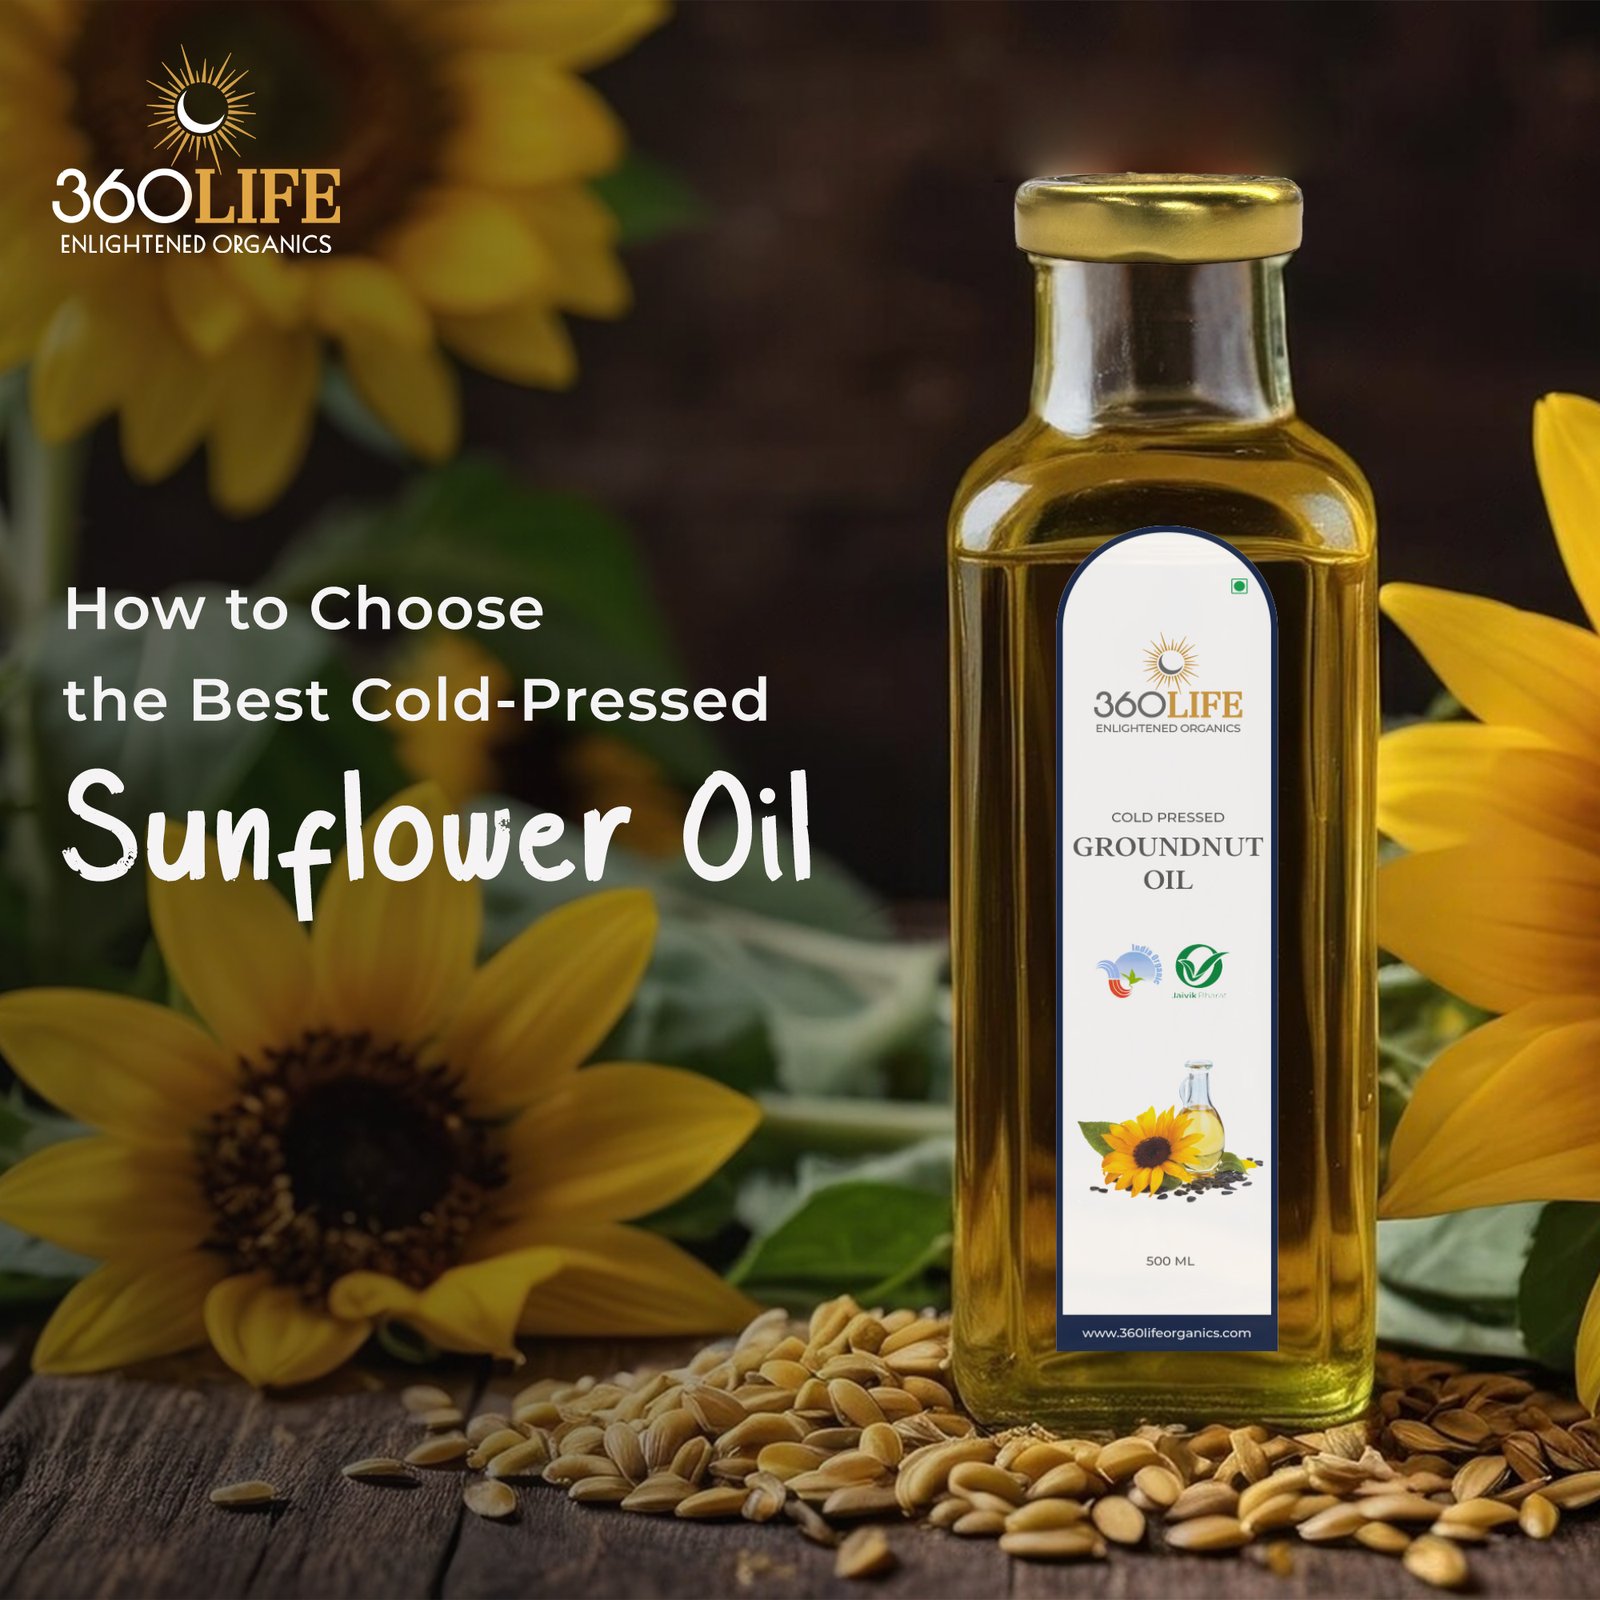 How to Choose the Best Cold-Pressed Sunflower Oil: A Buyer’s Guide